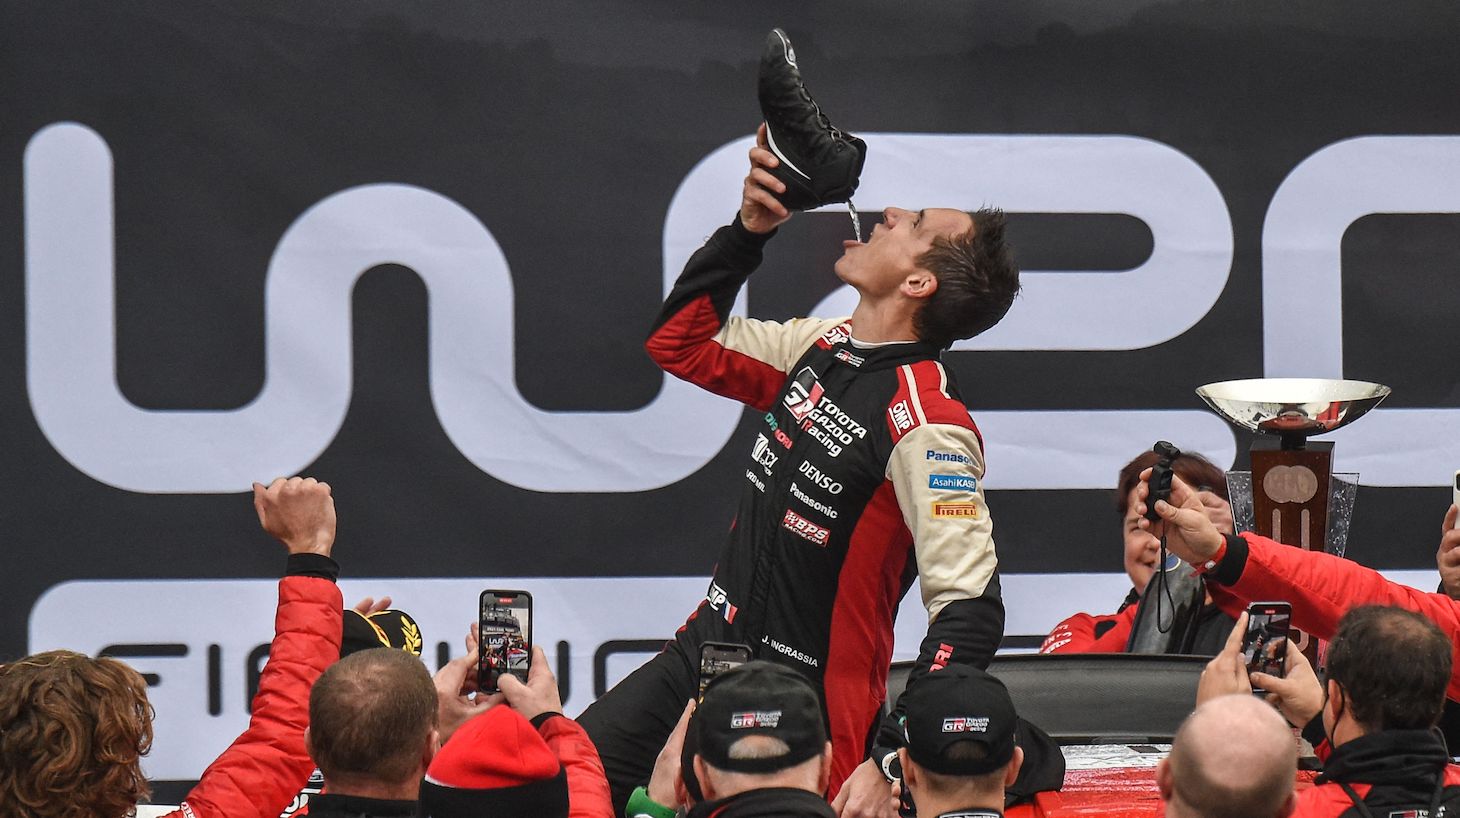 Julien Ingrassia traditionally drinks from a shoe as he celebrates his 8th World title on November 21, 2021 after the ACI Rally Monza 2021